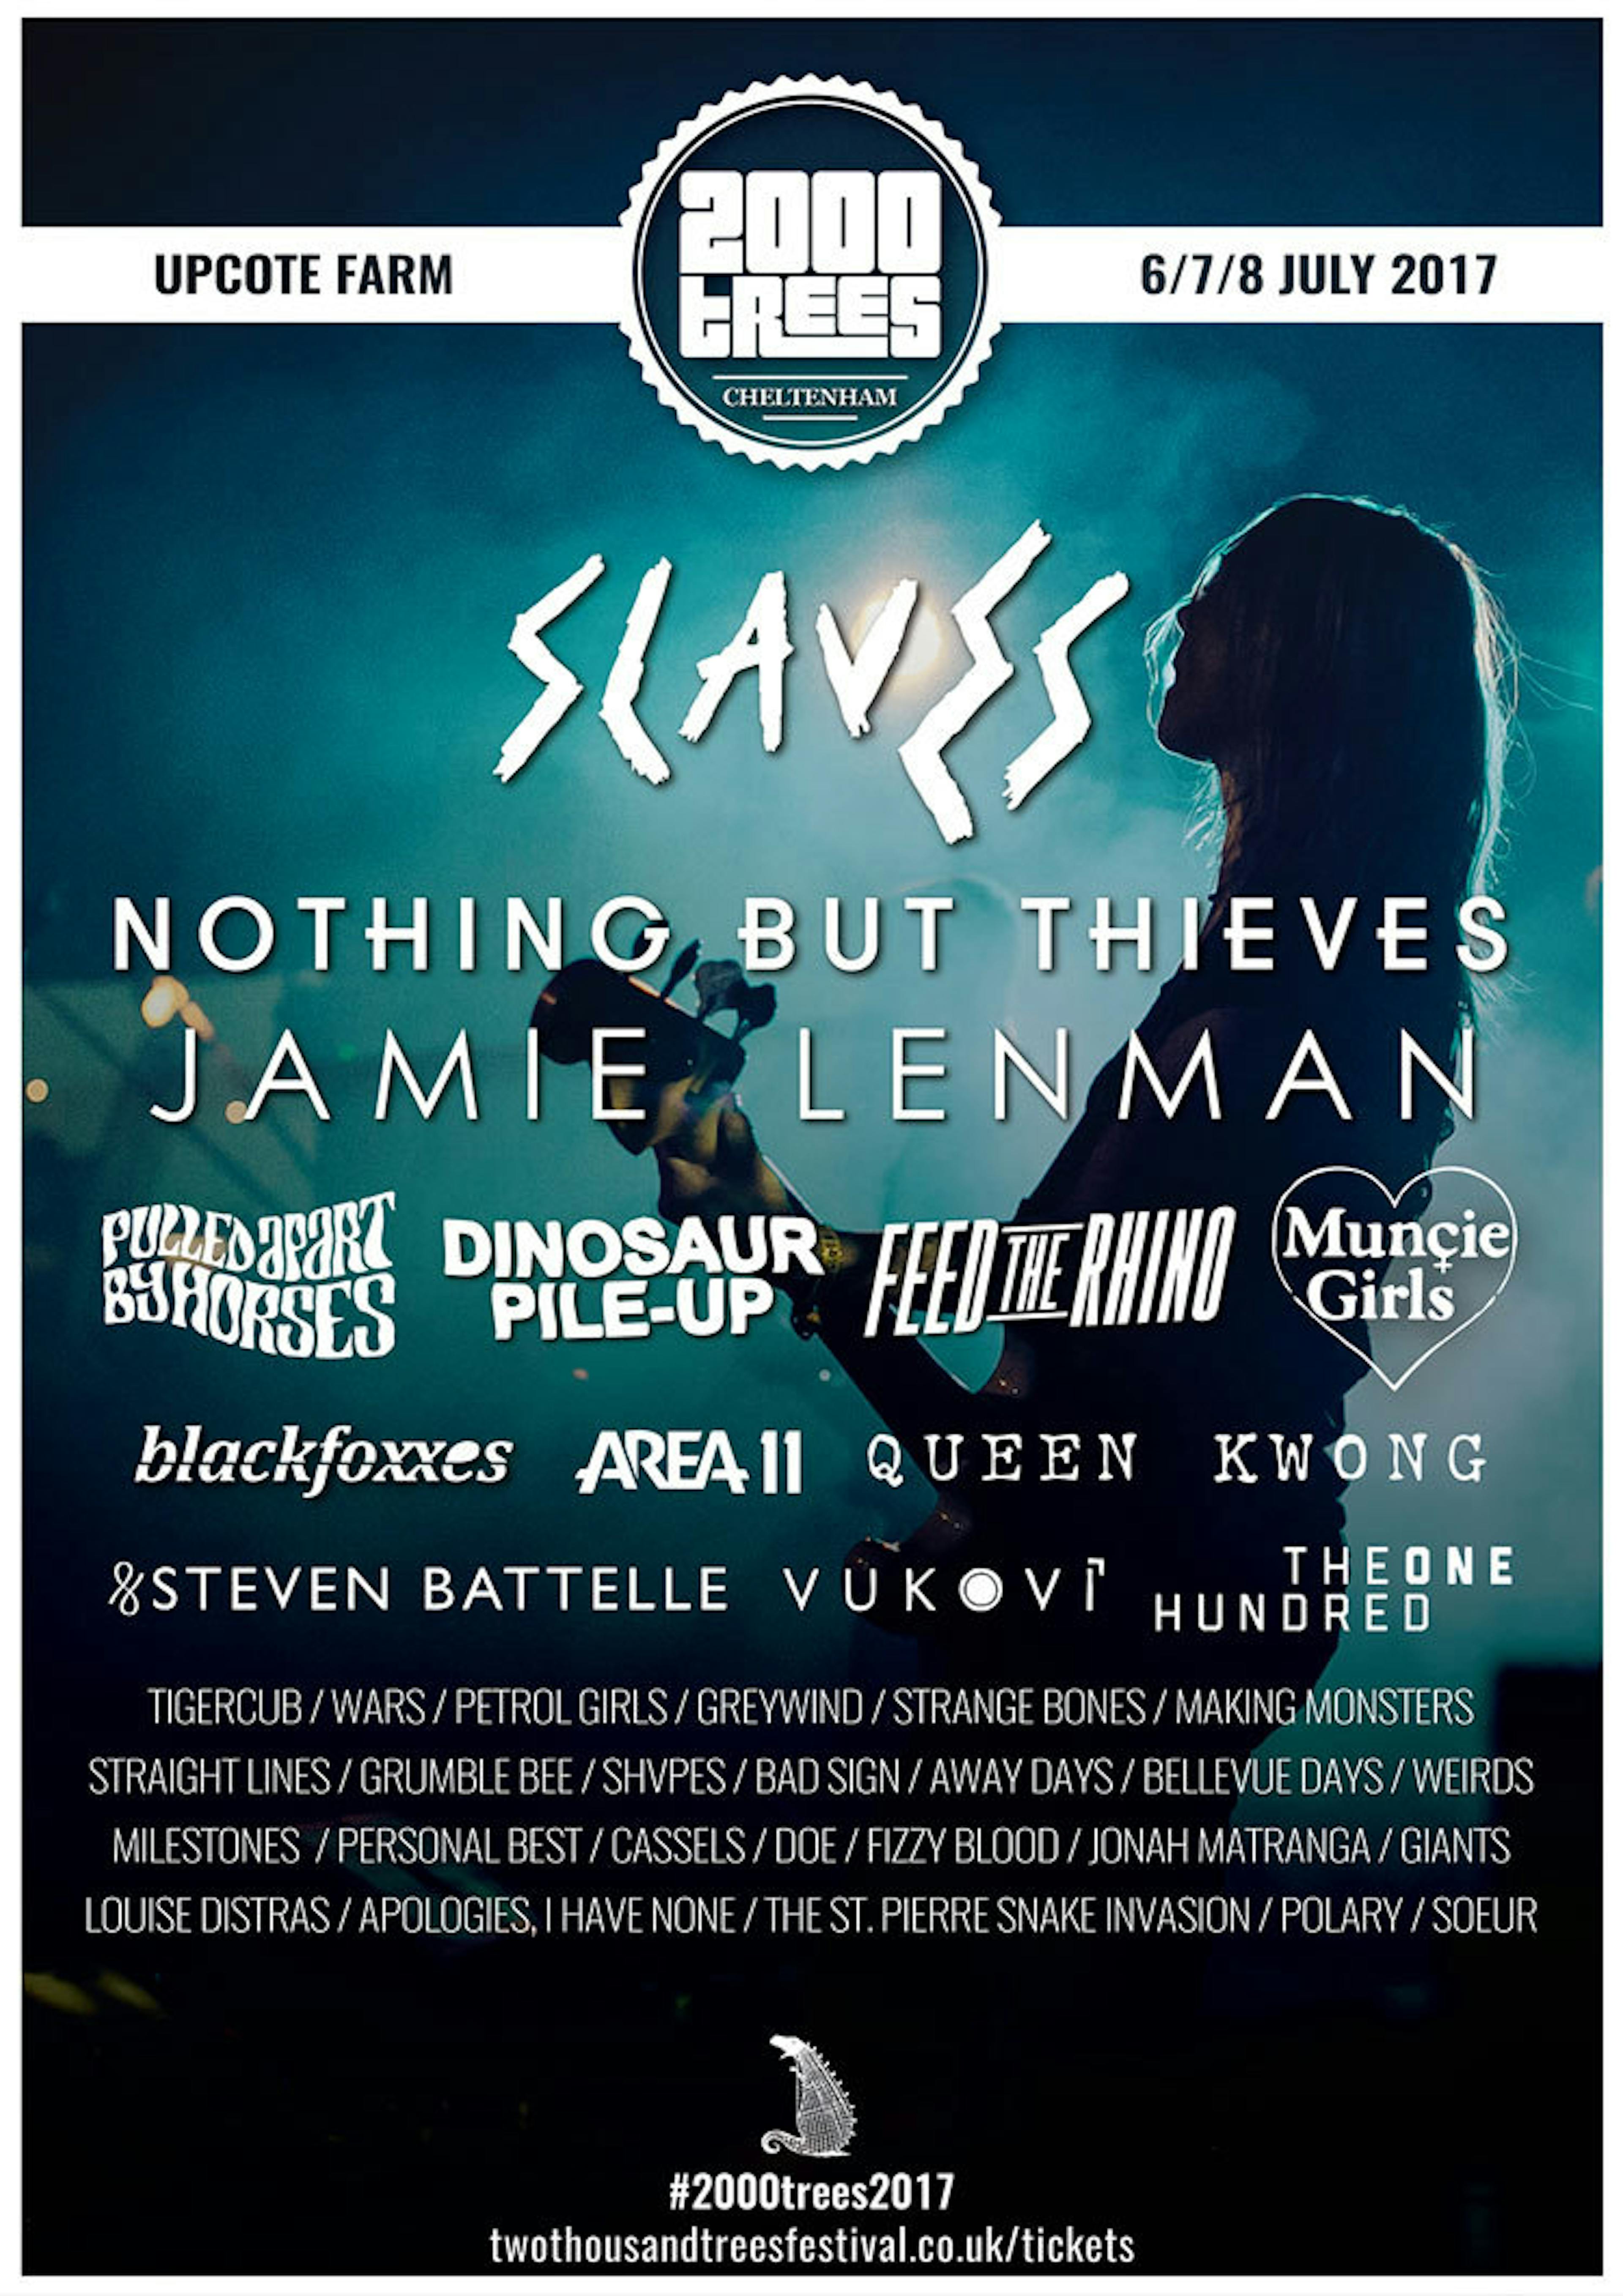 2000trees Festival Announces 38 Bands Including First Headliner